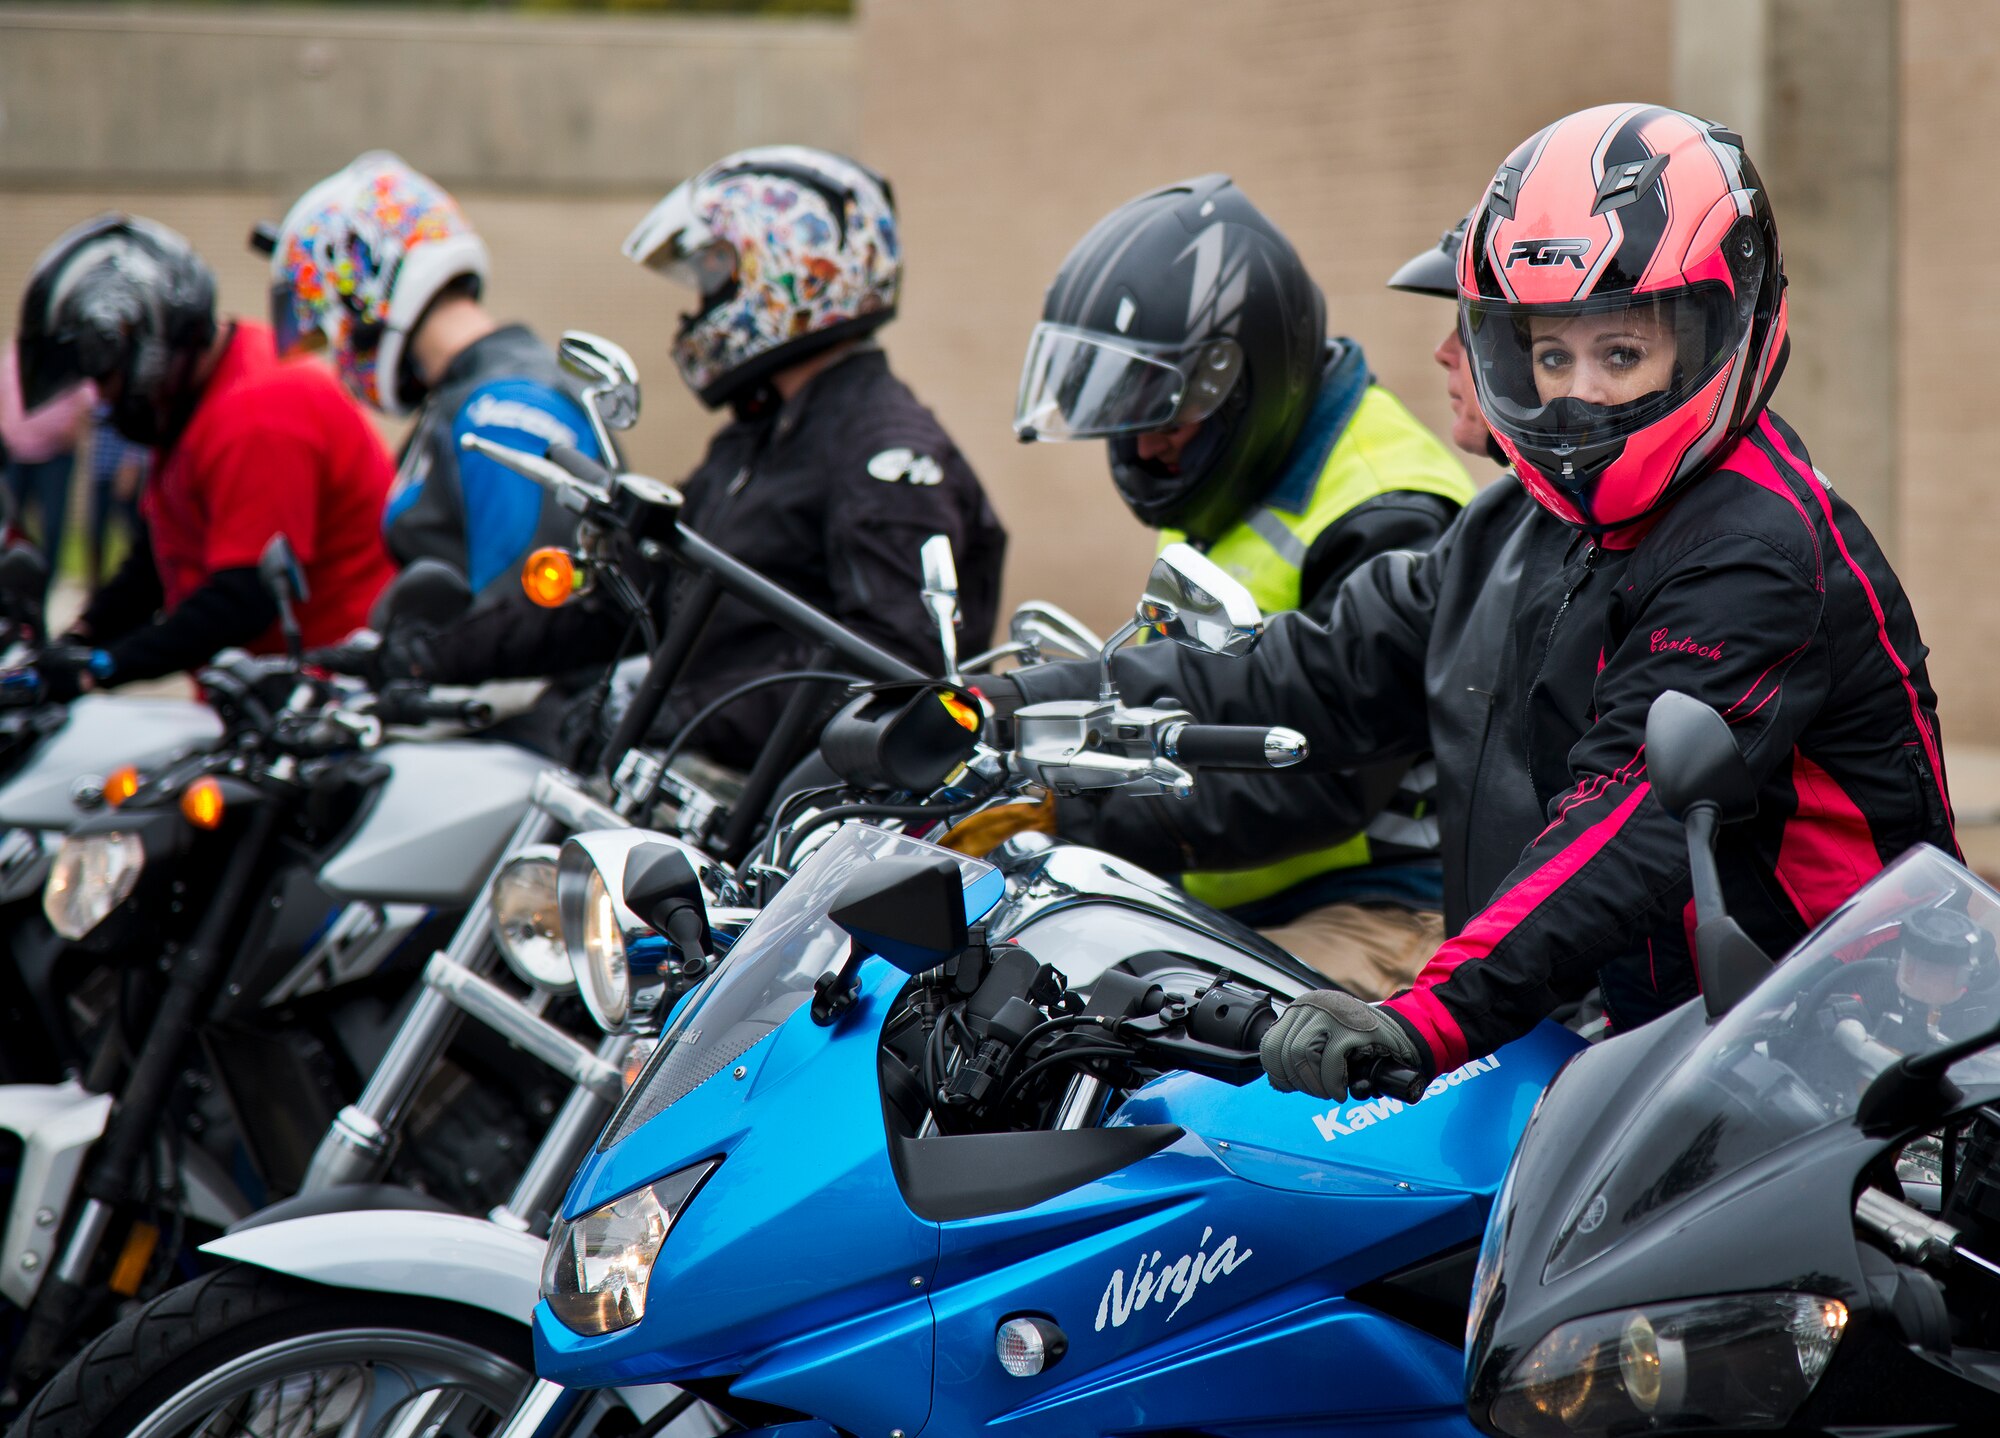 A female biker waits to begin a group ride with her squadron after the base’s annual motorcycle safety rally April 15 at Eglin Air Force Base, Fla.  Approximately 600 civilian and military riders rode in for the joint 53rd Wing/96th Test Wing event. (U.S. Air Force photo/Samuel King Jr.)